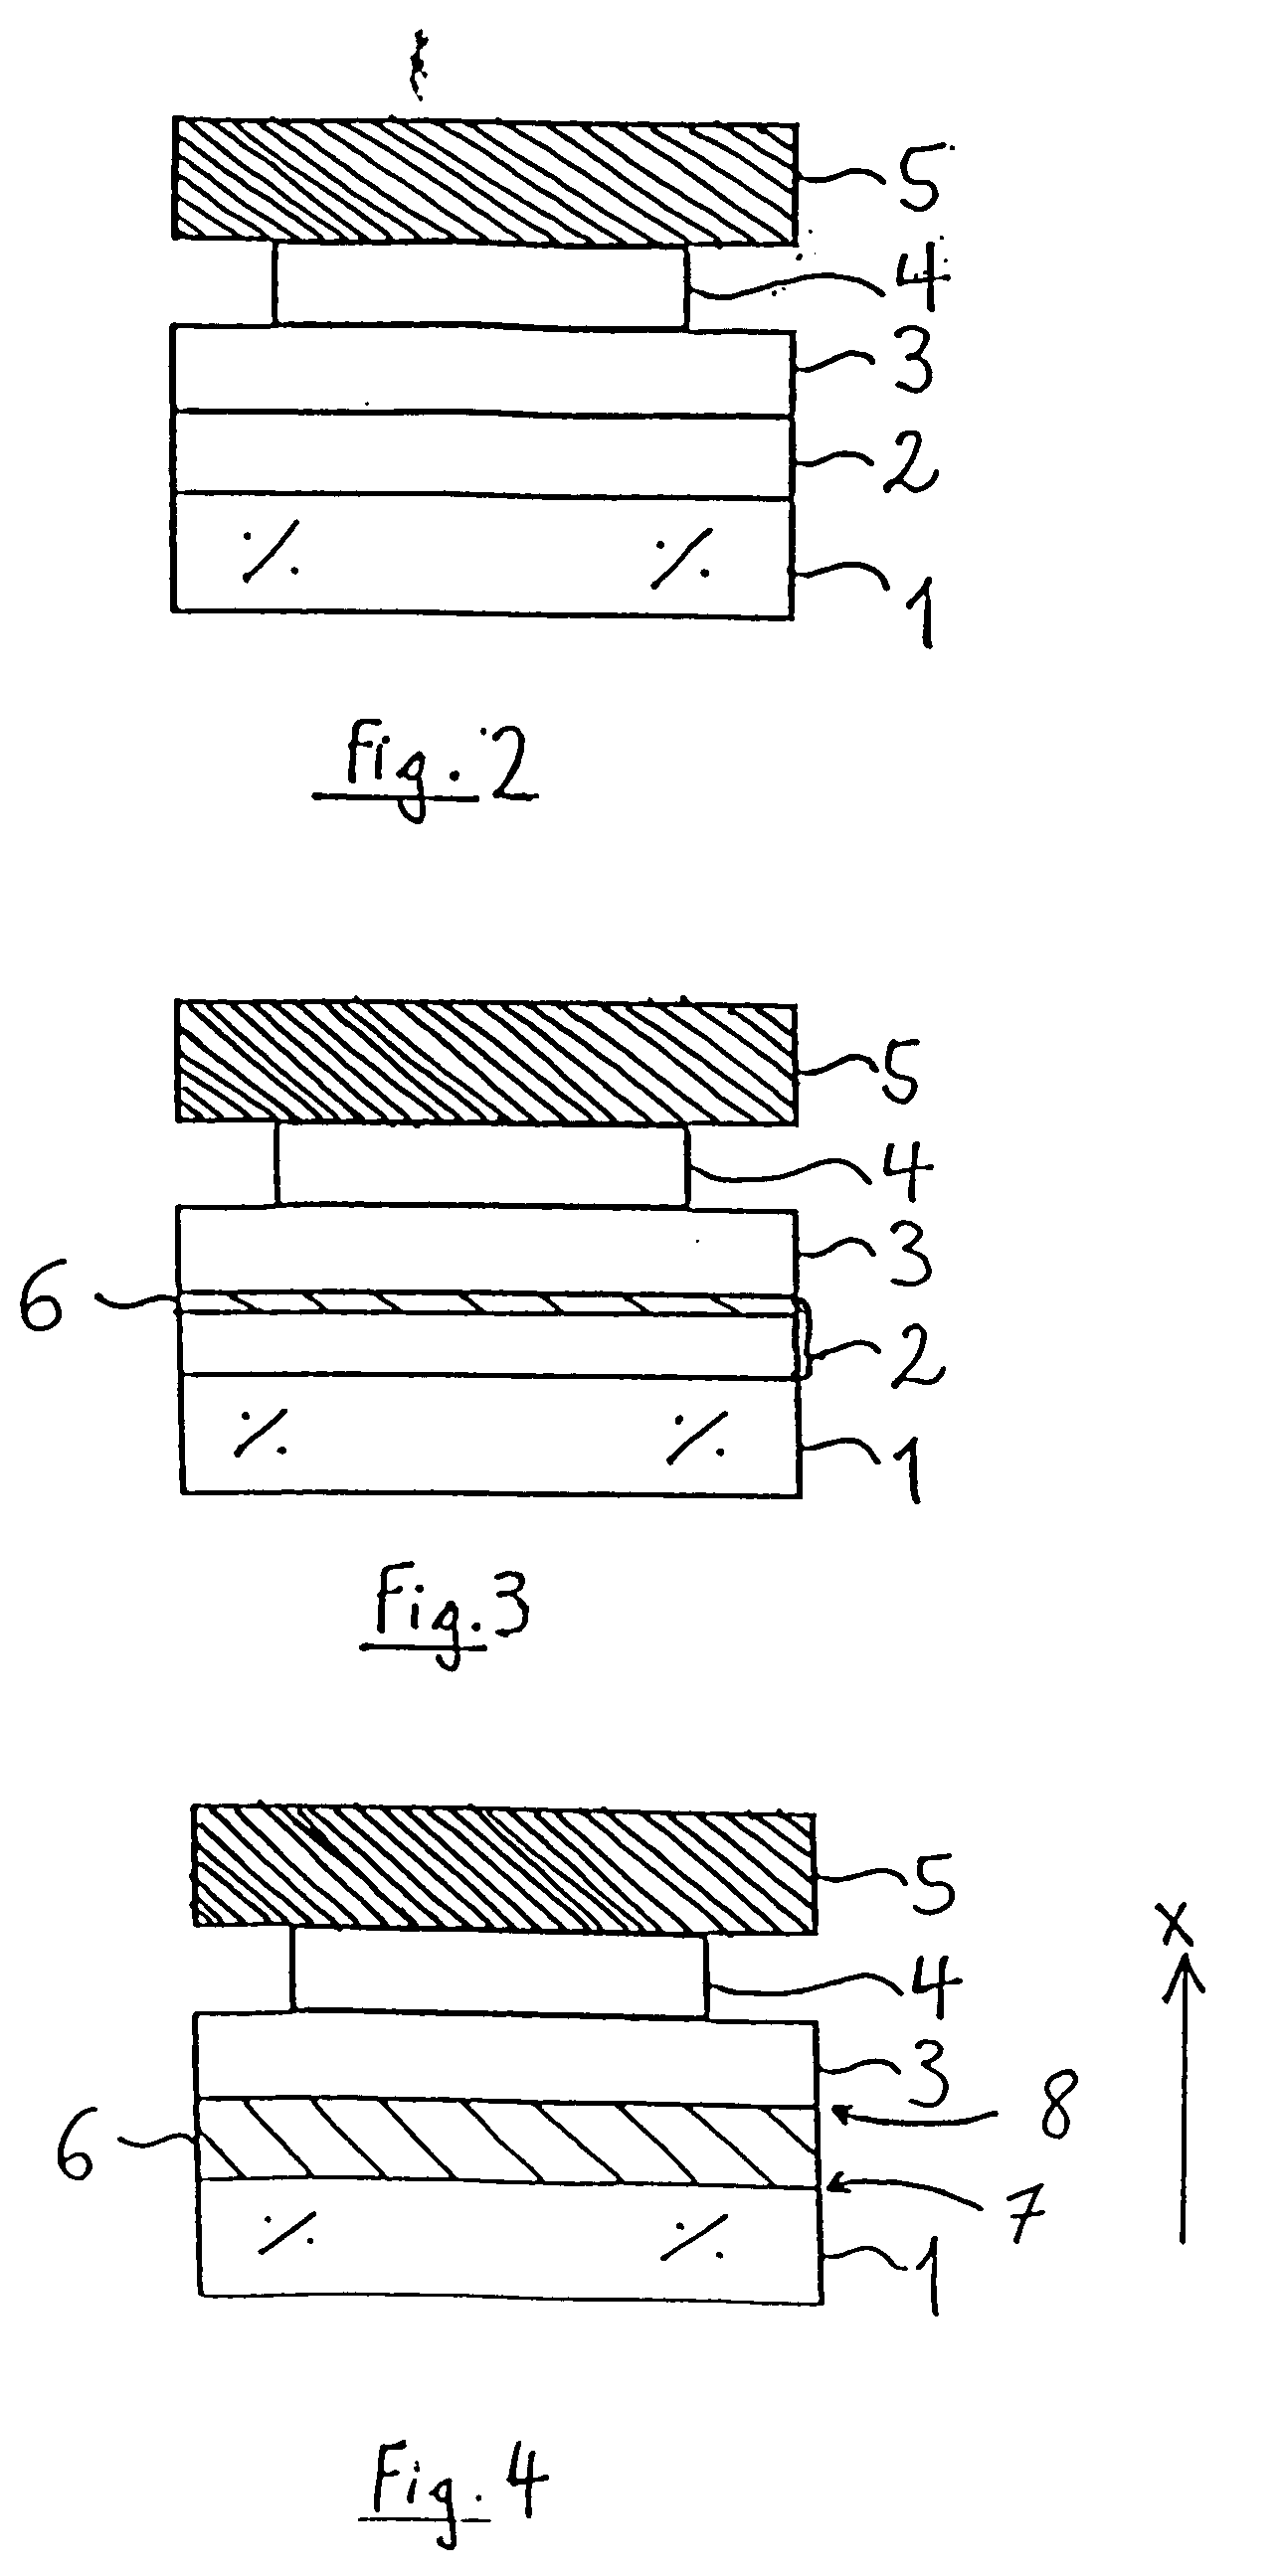 Optical mount with UV adhesive and protective layer